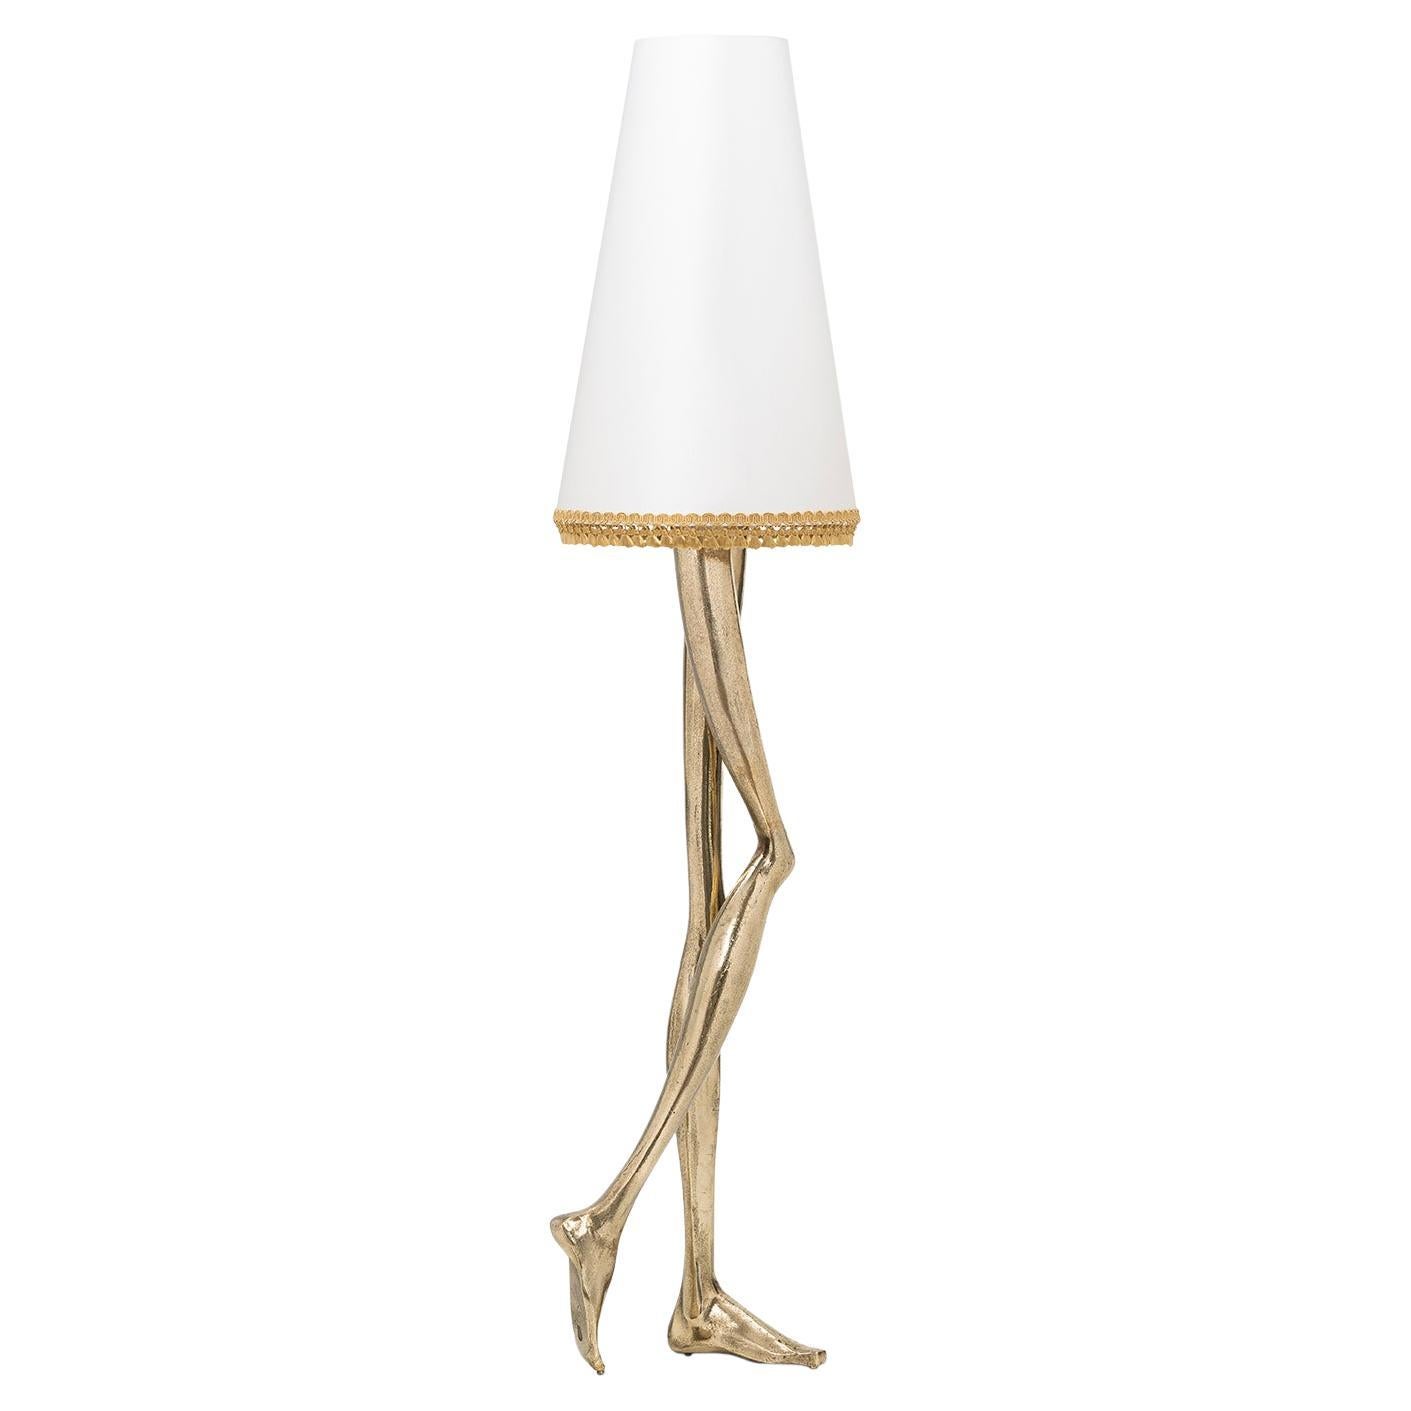 Contemporary Monroe Floor Lamp, Textured Brass Cast and an off White Lampshade For Sale